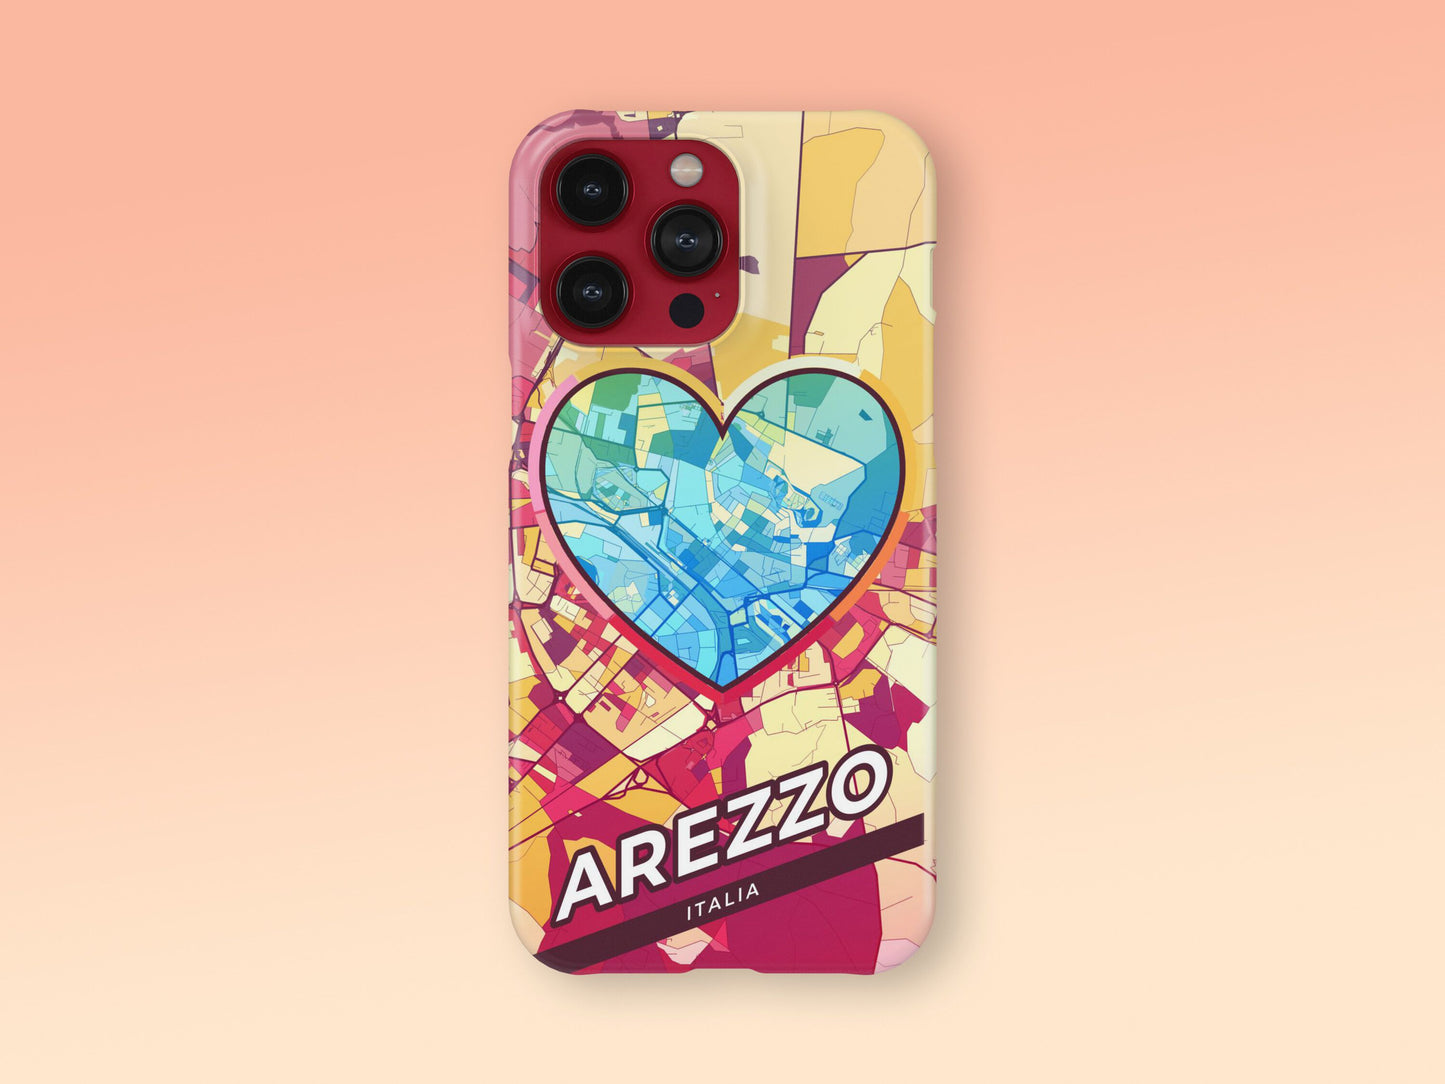 Arezzo Italy slim phone case with colorful icon. Birthday, wedding or housewarming gift. Couple match cases. 2